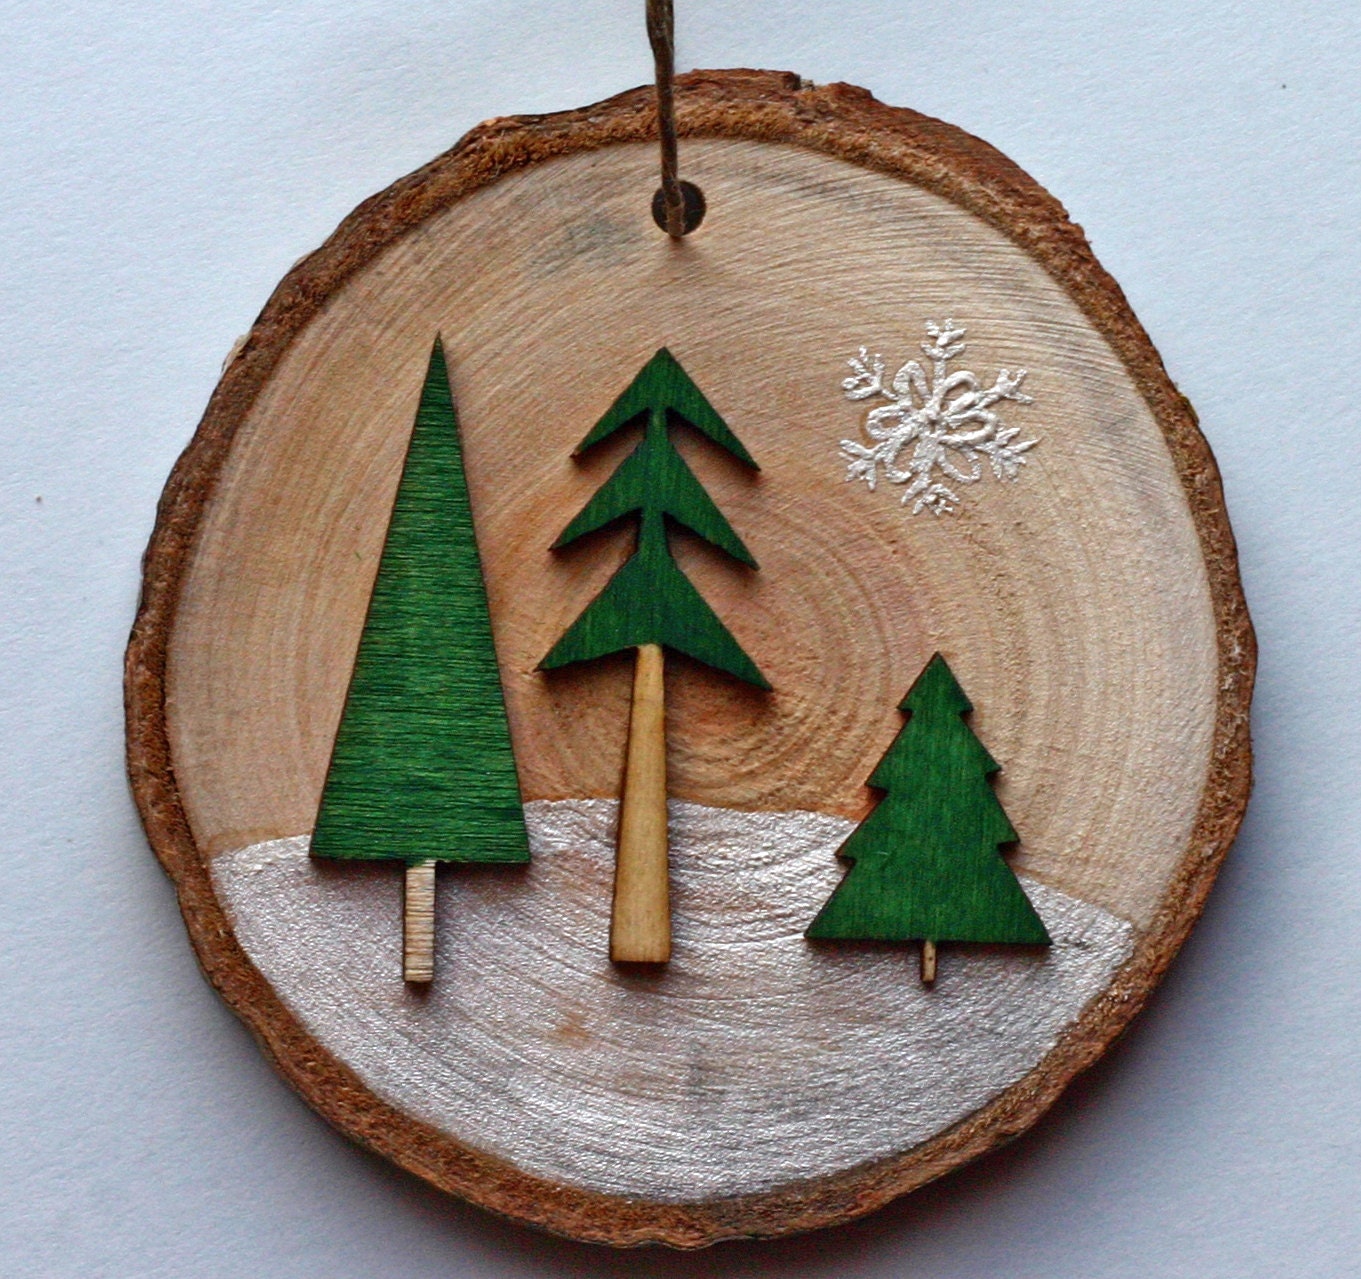 Winter scene on birch wood birch tree slice, green trees in snow, woods, natural, ornament, green and brown, snow, three dimensional - DeborahMcGeeArt